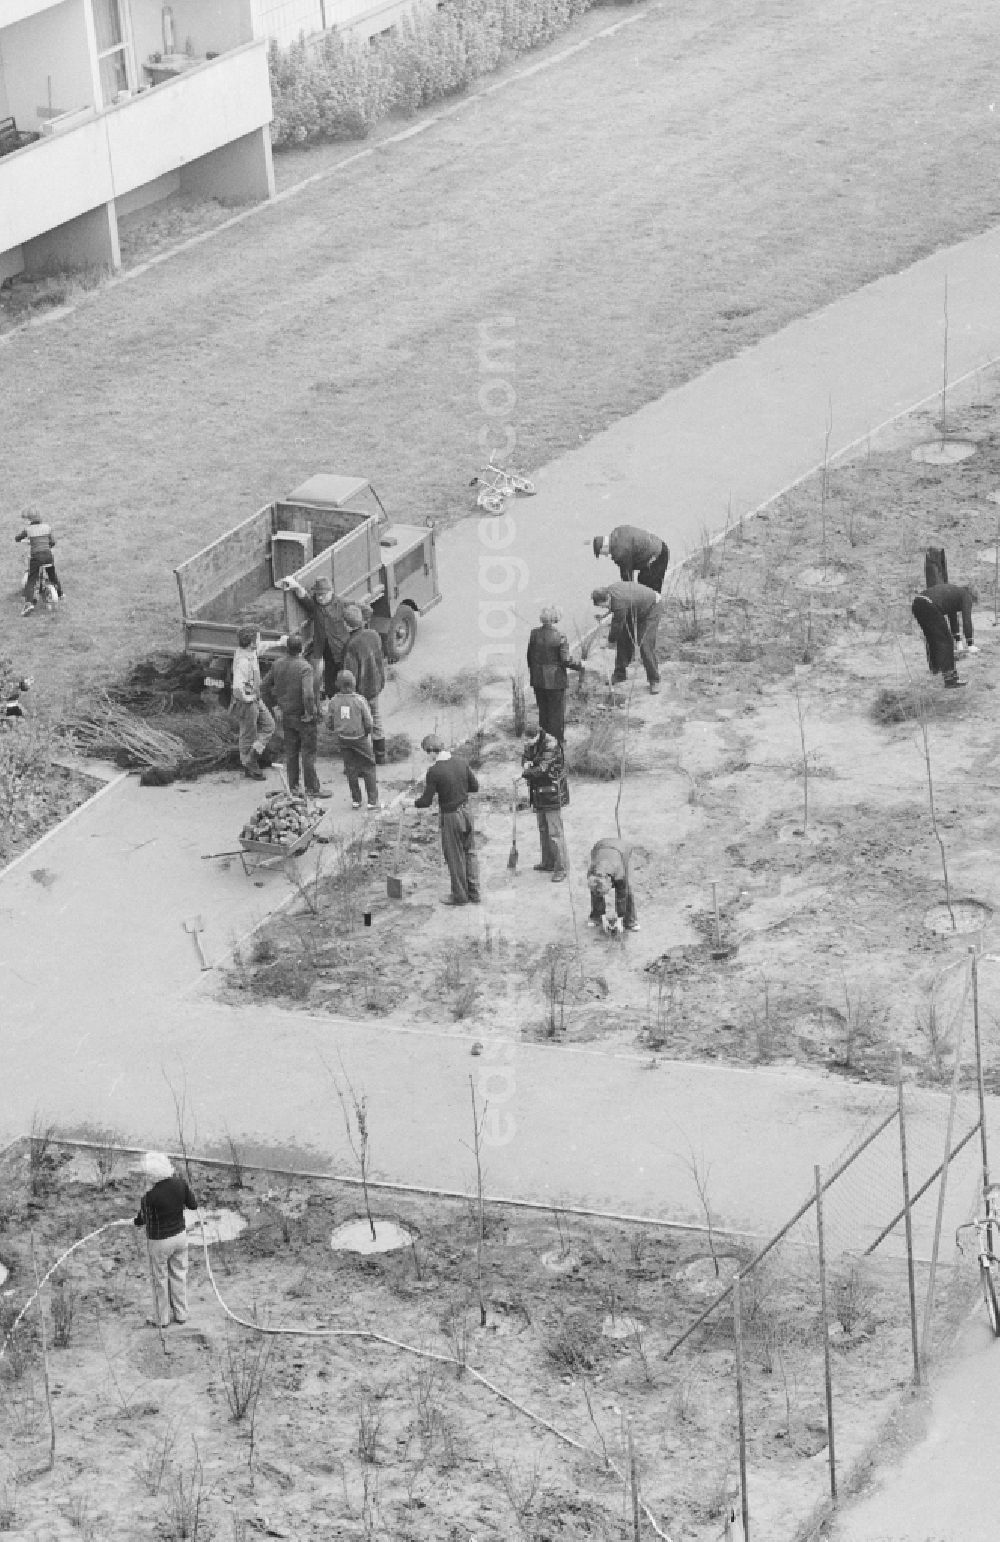 Berlin: Subbotnik, voluntary labor in the courtyard in a new residential area in Berlin, the former capital of the GDR, the German Democratic Republic. This was • Annual spring cleaning in the cities, this waste was eliminated, streets were swept, planted trees and shrubs, and much more